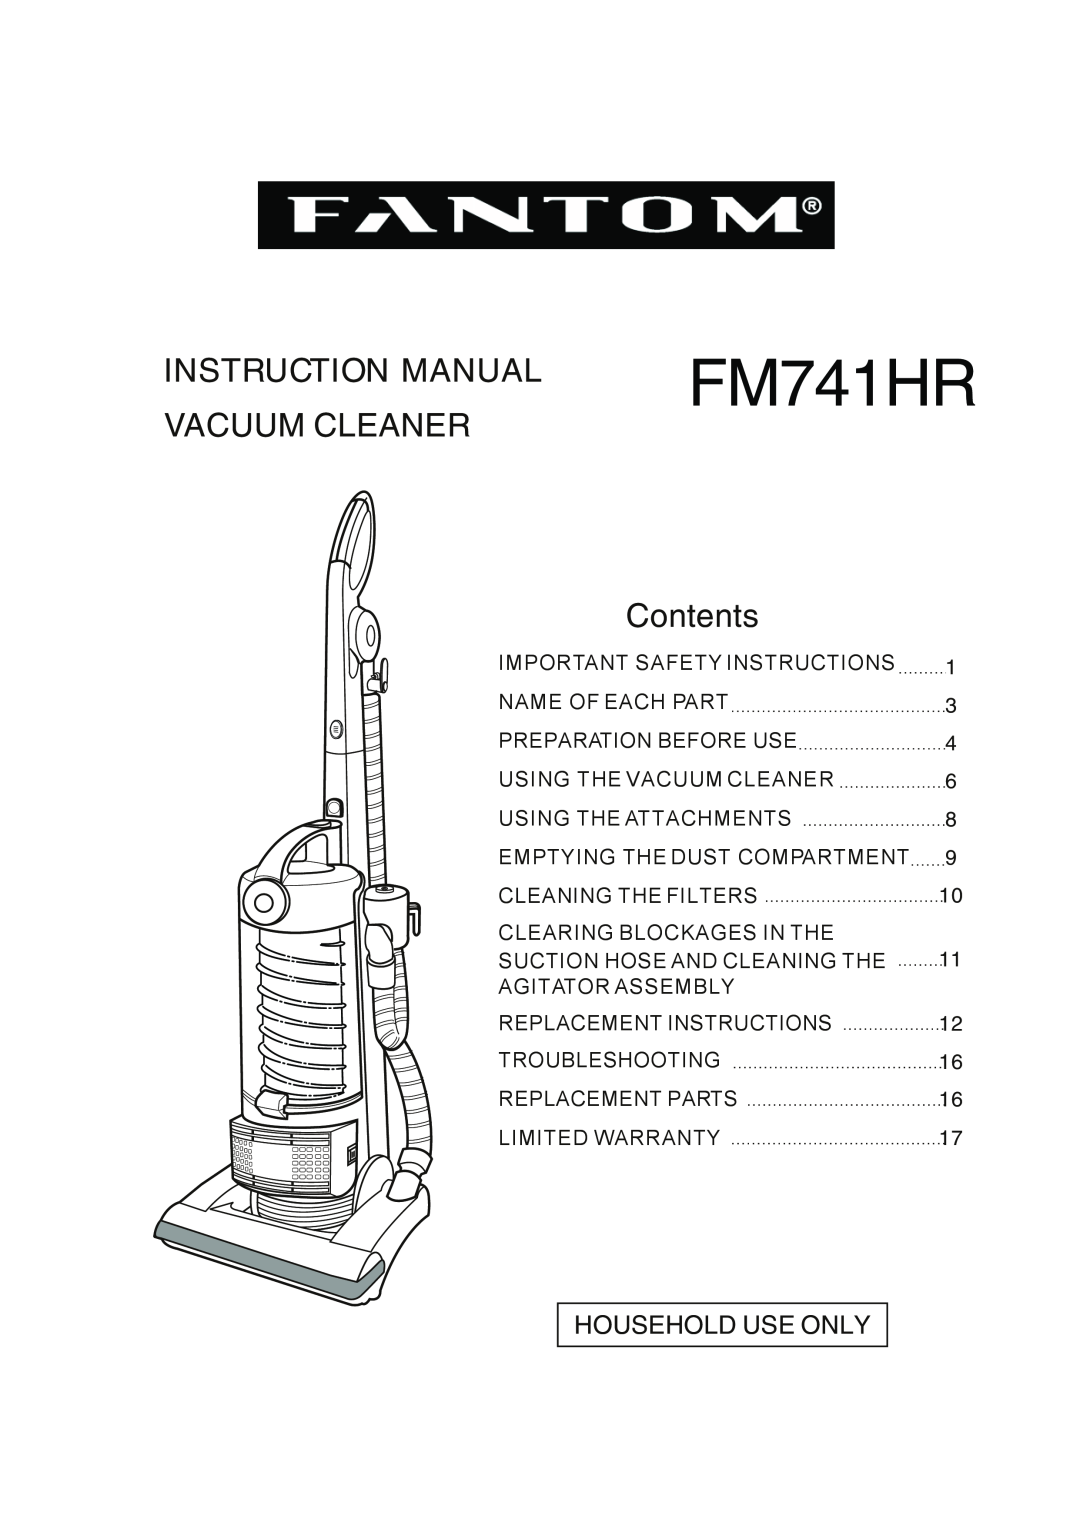 Fantom Vacuum FM741HR instruction manual VACUUM CLEANER Contents, Household Use Only 